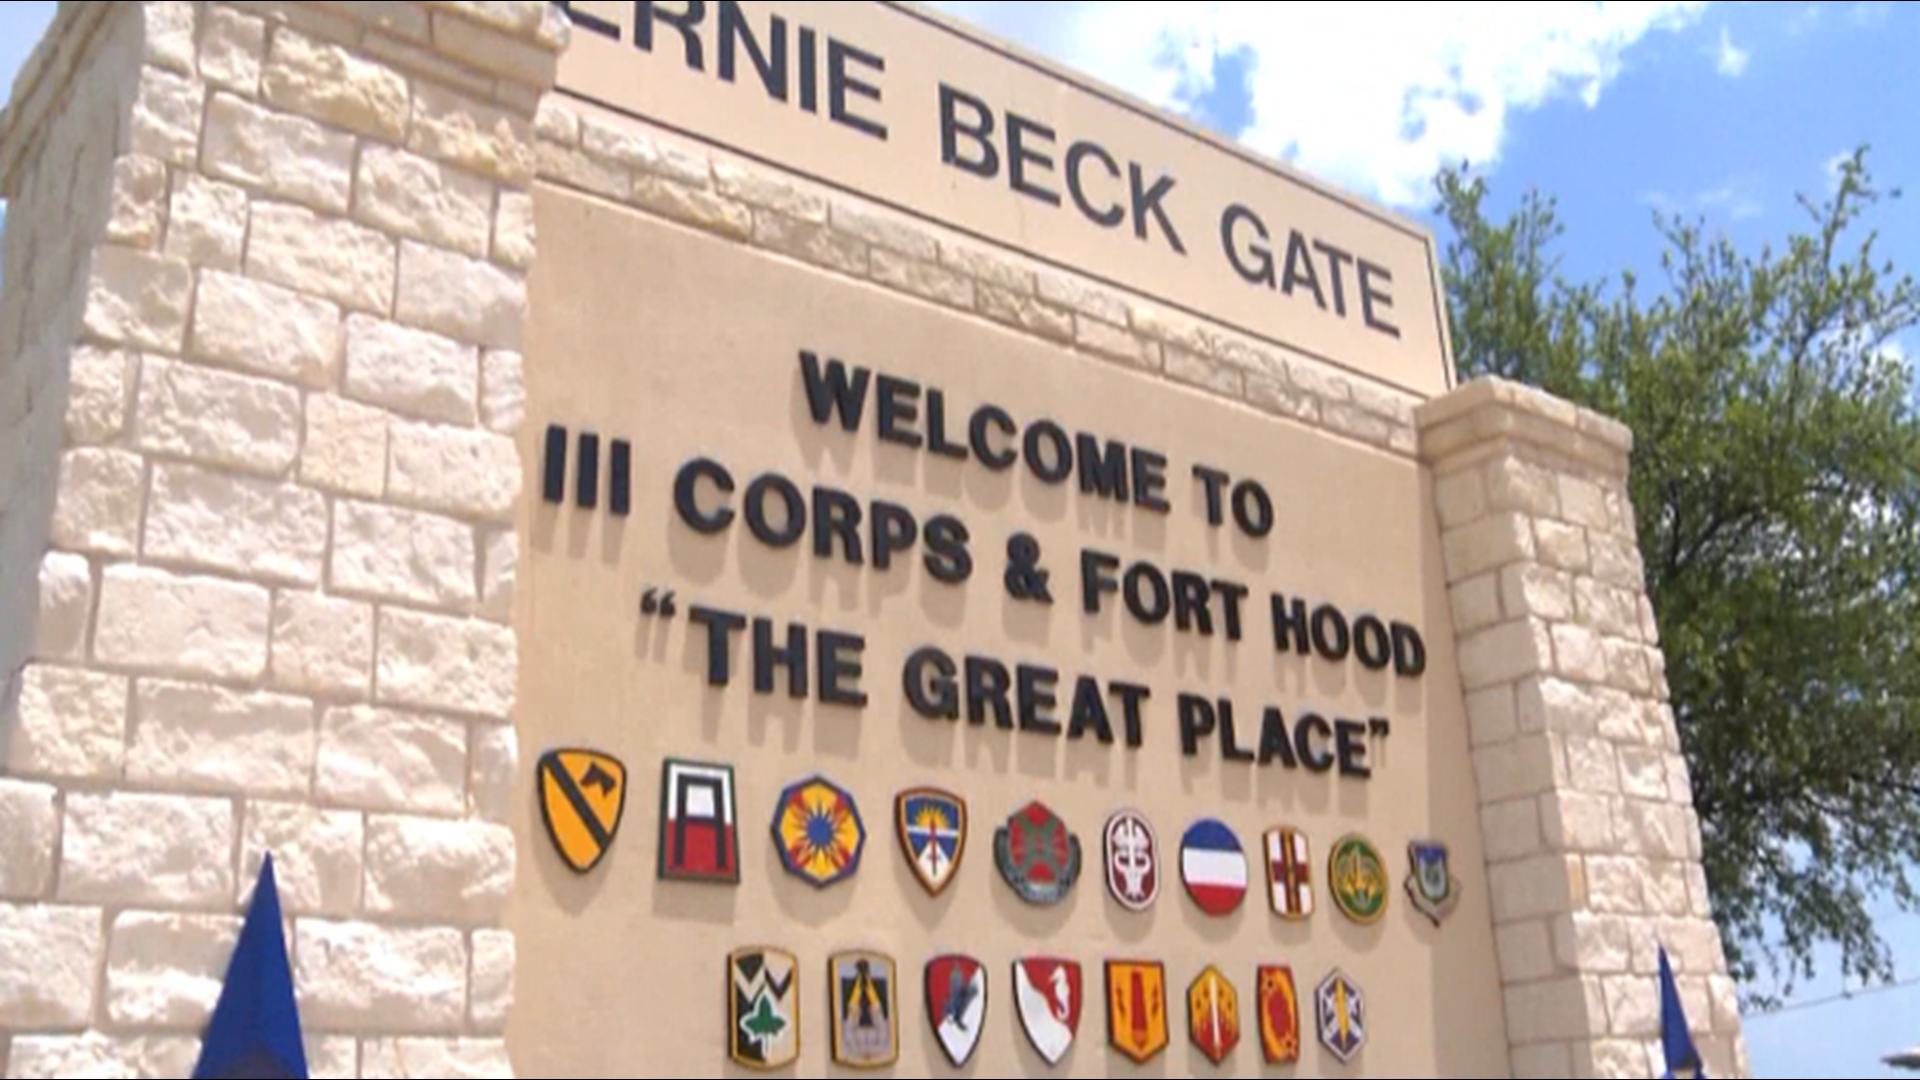 14 Fort Hood leaders were relieved of duty or suspended in response to an independent review committee's investigation launched after Vanessa Guillen's death.